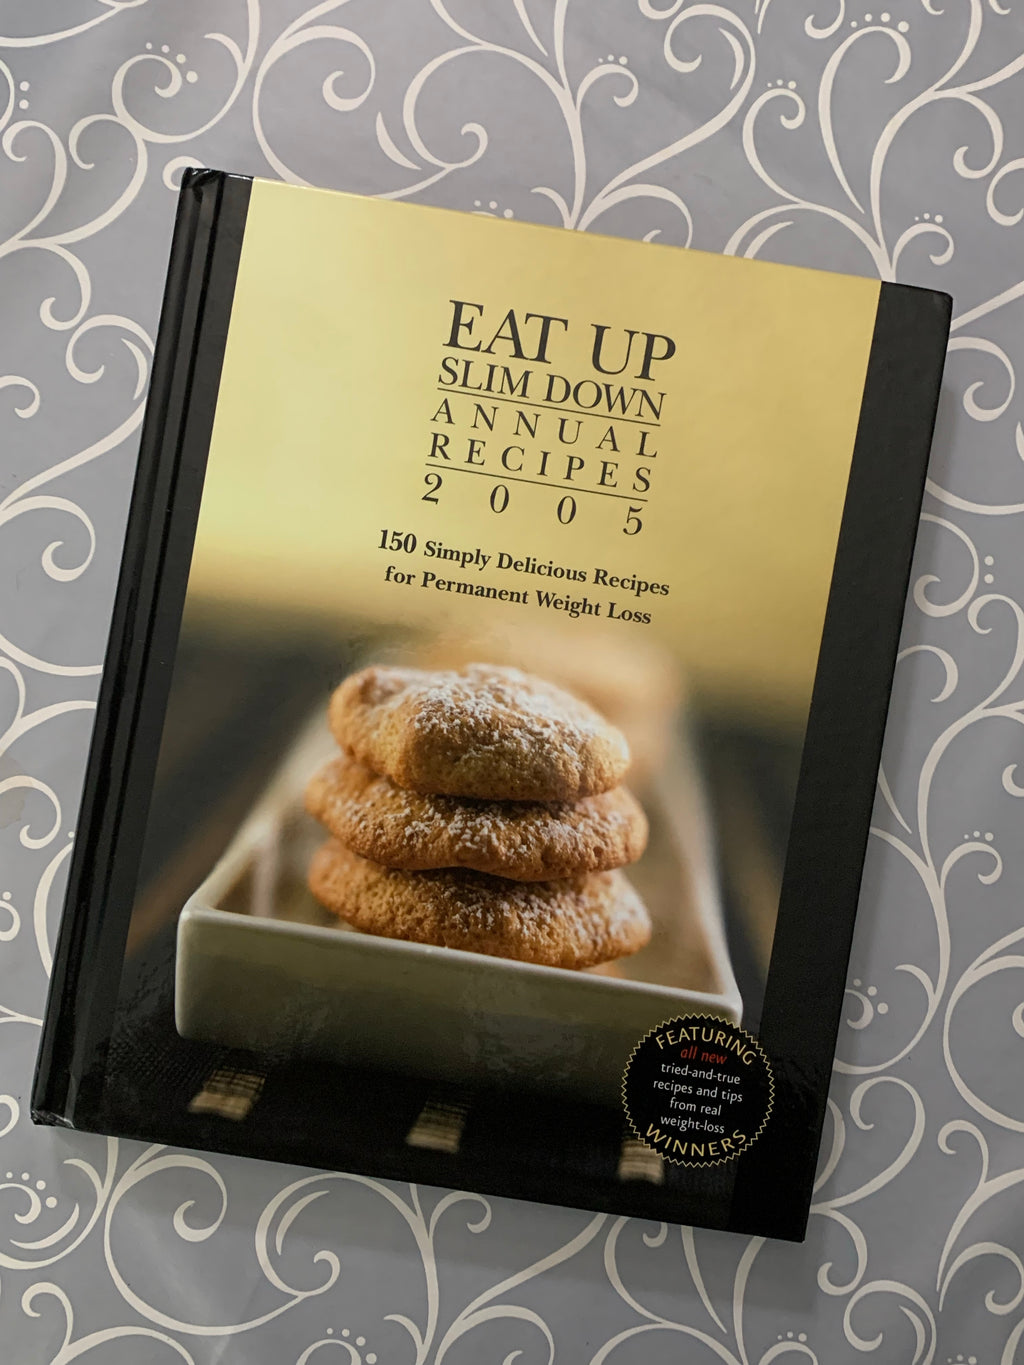 Eat Up, Slim Down: Annual Recipes 2005